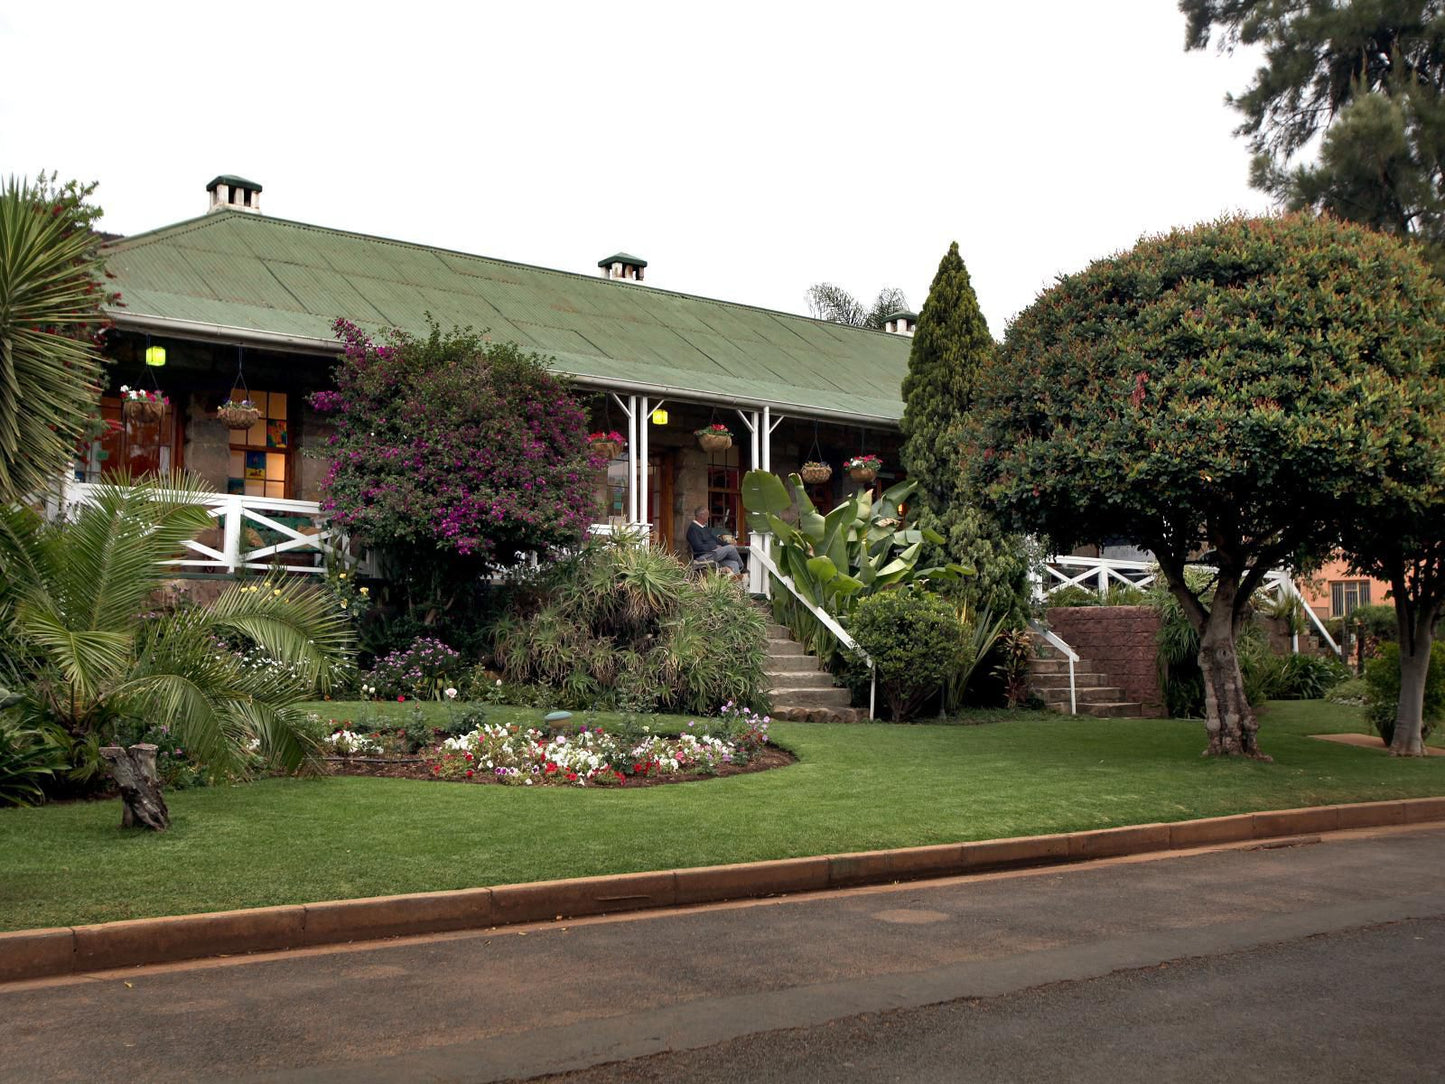 Shamrock Arms Guest Lodge Waterval Boven Mpumalanga South Africa House, Building, Architecture, Garden, Nature, Plant